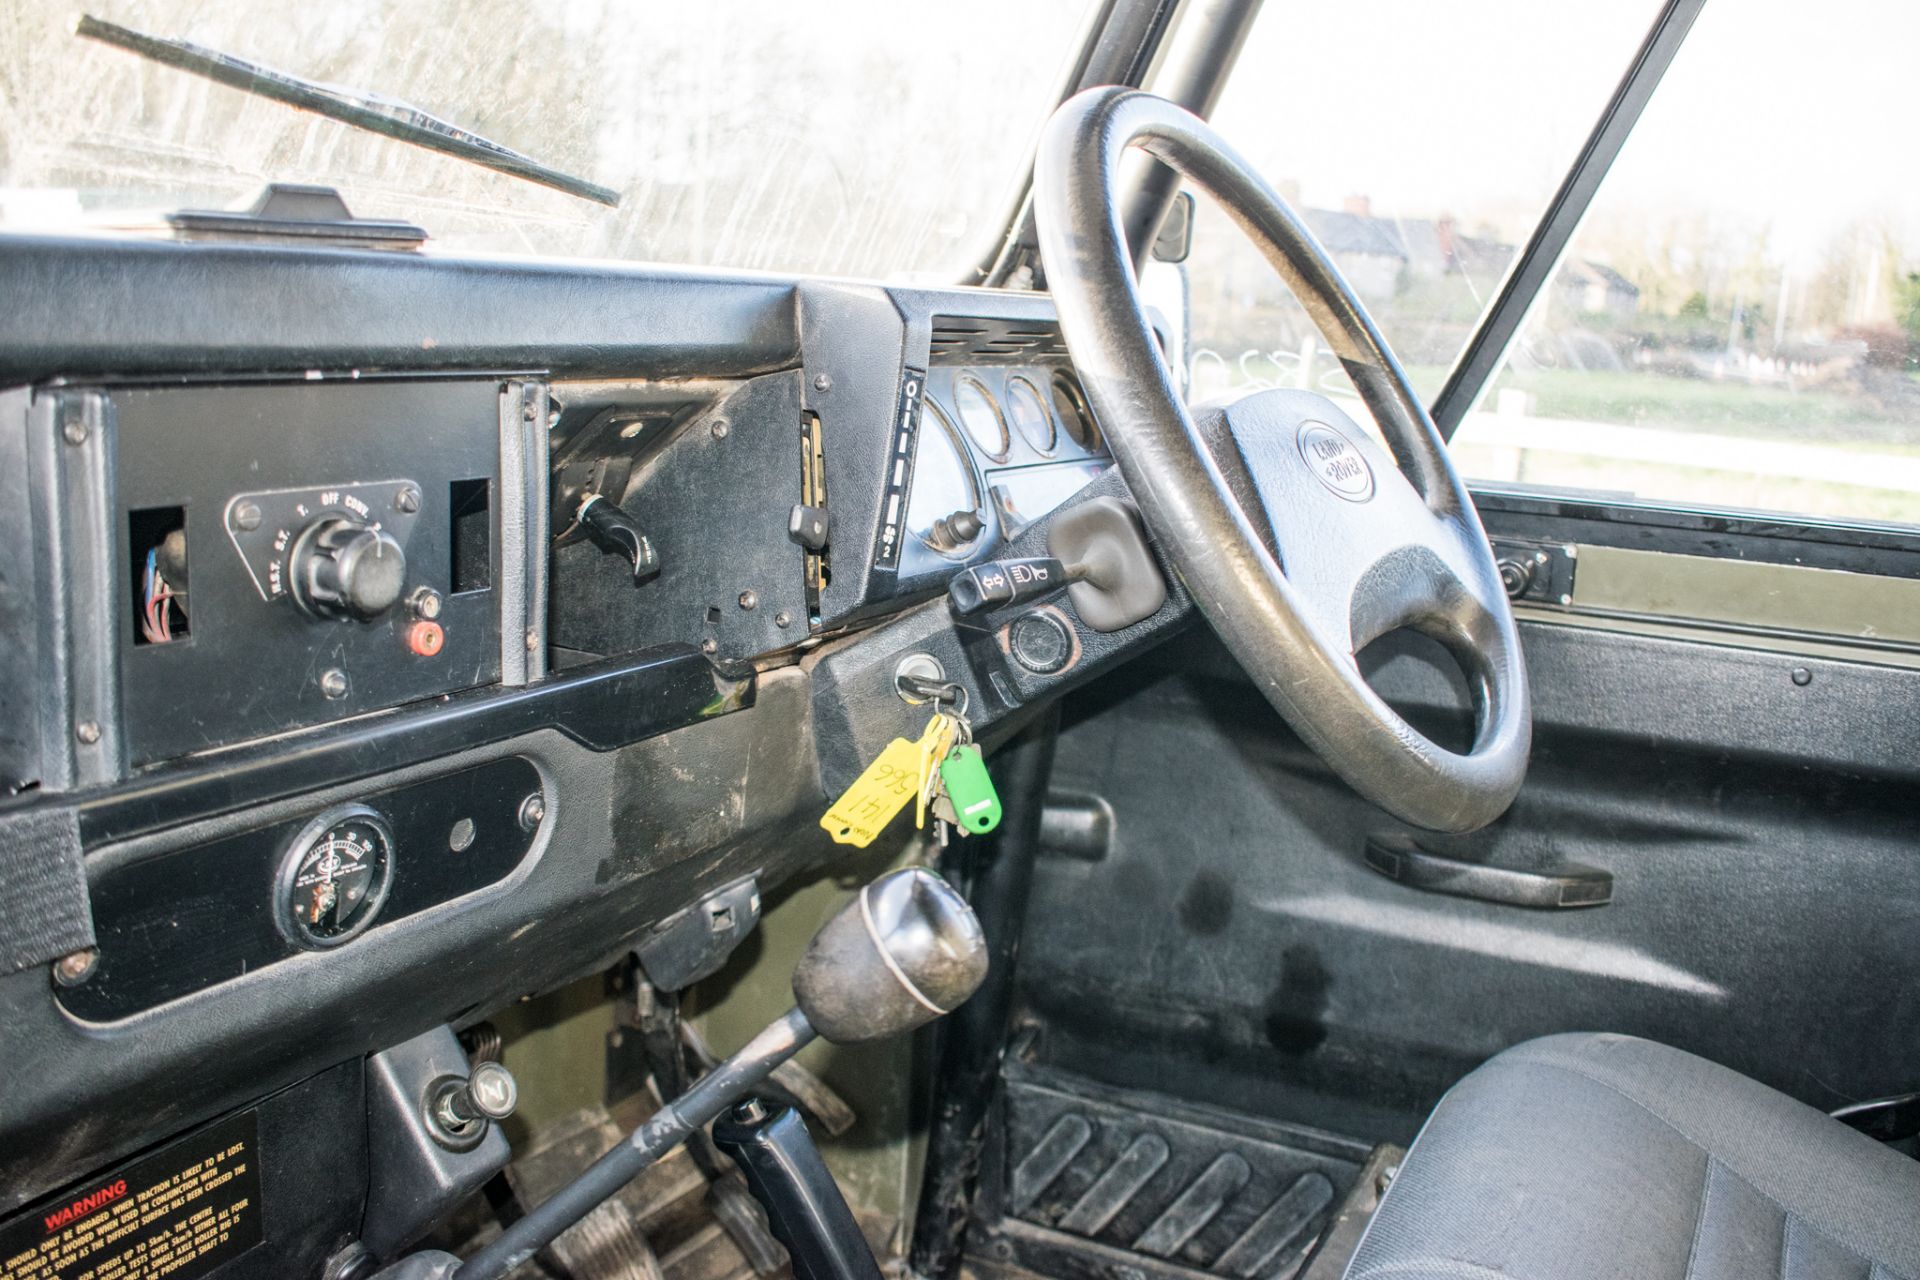 Land Rover Defender 90 Wolf 300 TDI 4wd TUL hard top utility vehicle (EX MOD) Date into Service: - Image 27 of 27